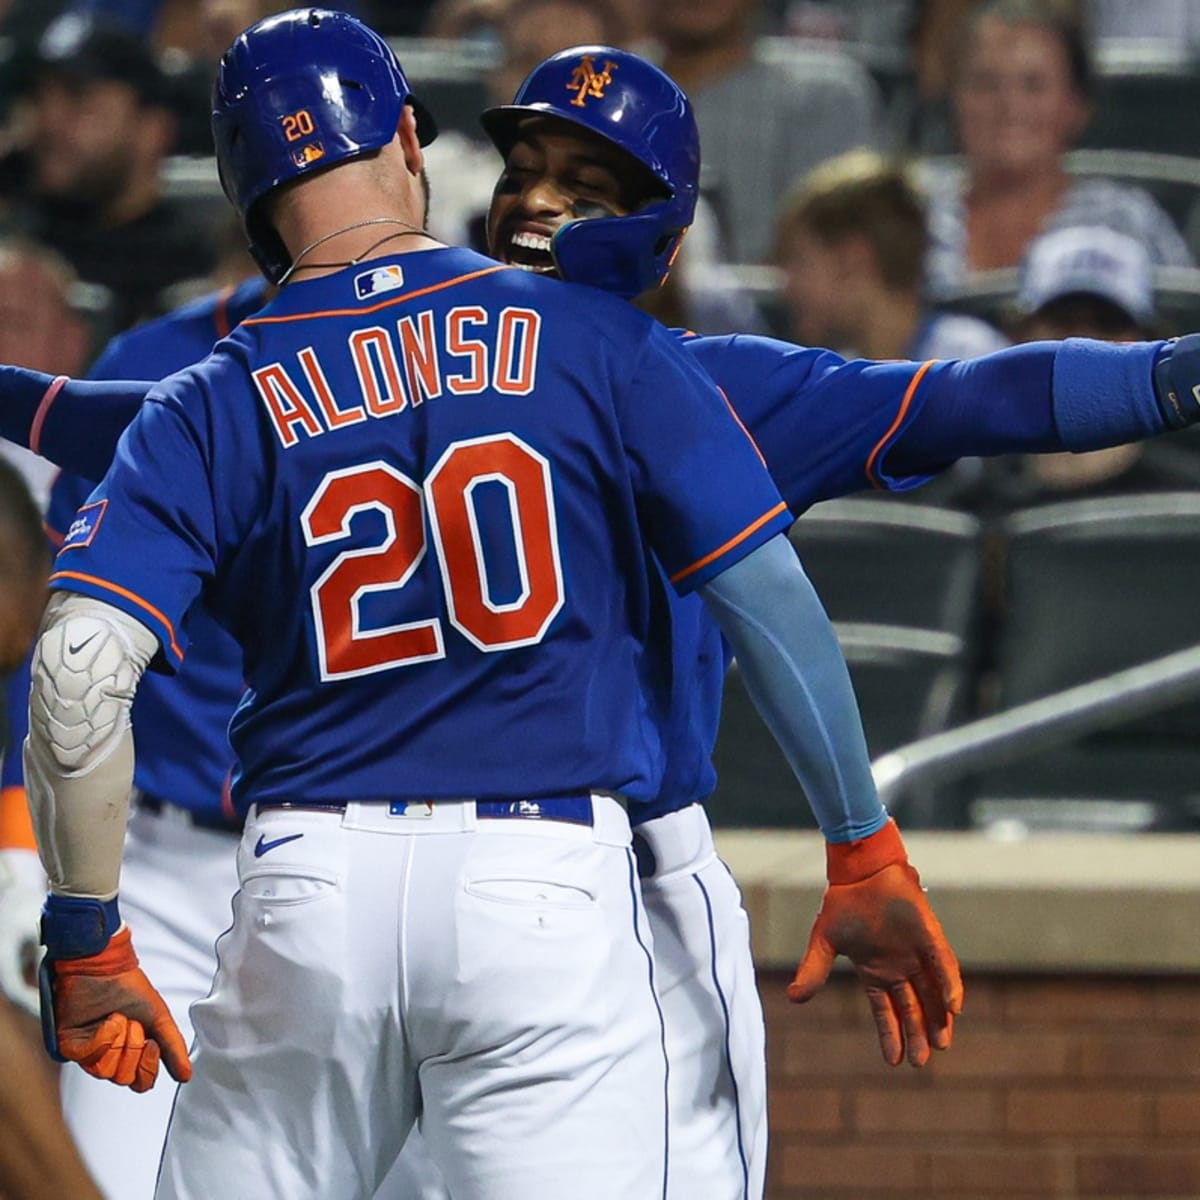 New York Mets Star Pete Alonso Moves Up Lists in Baseball - and Team -  History on Monday Night - Fastball